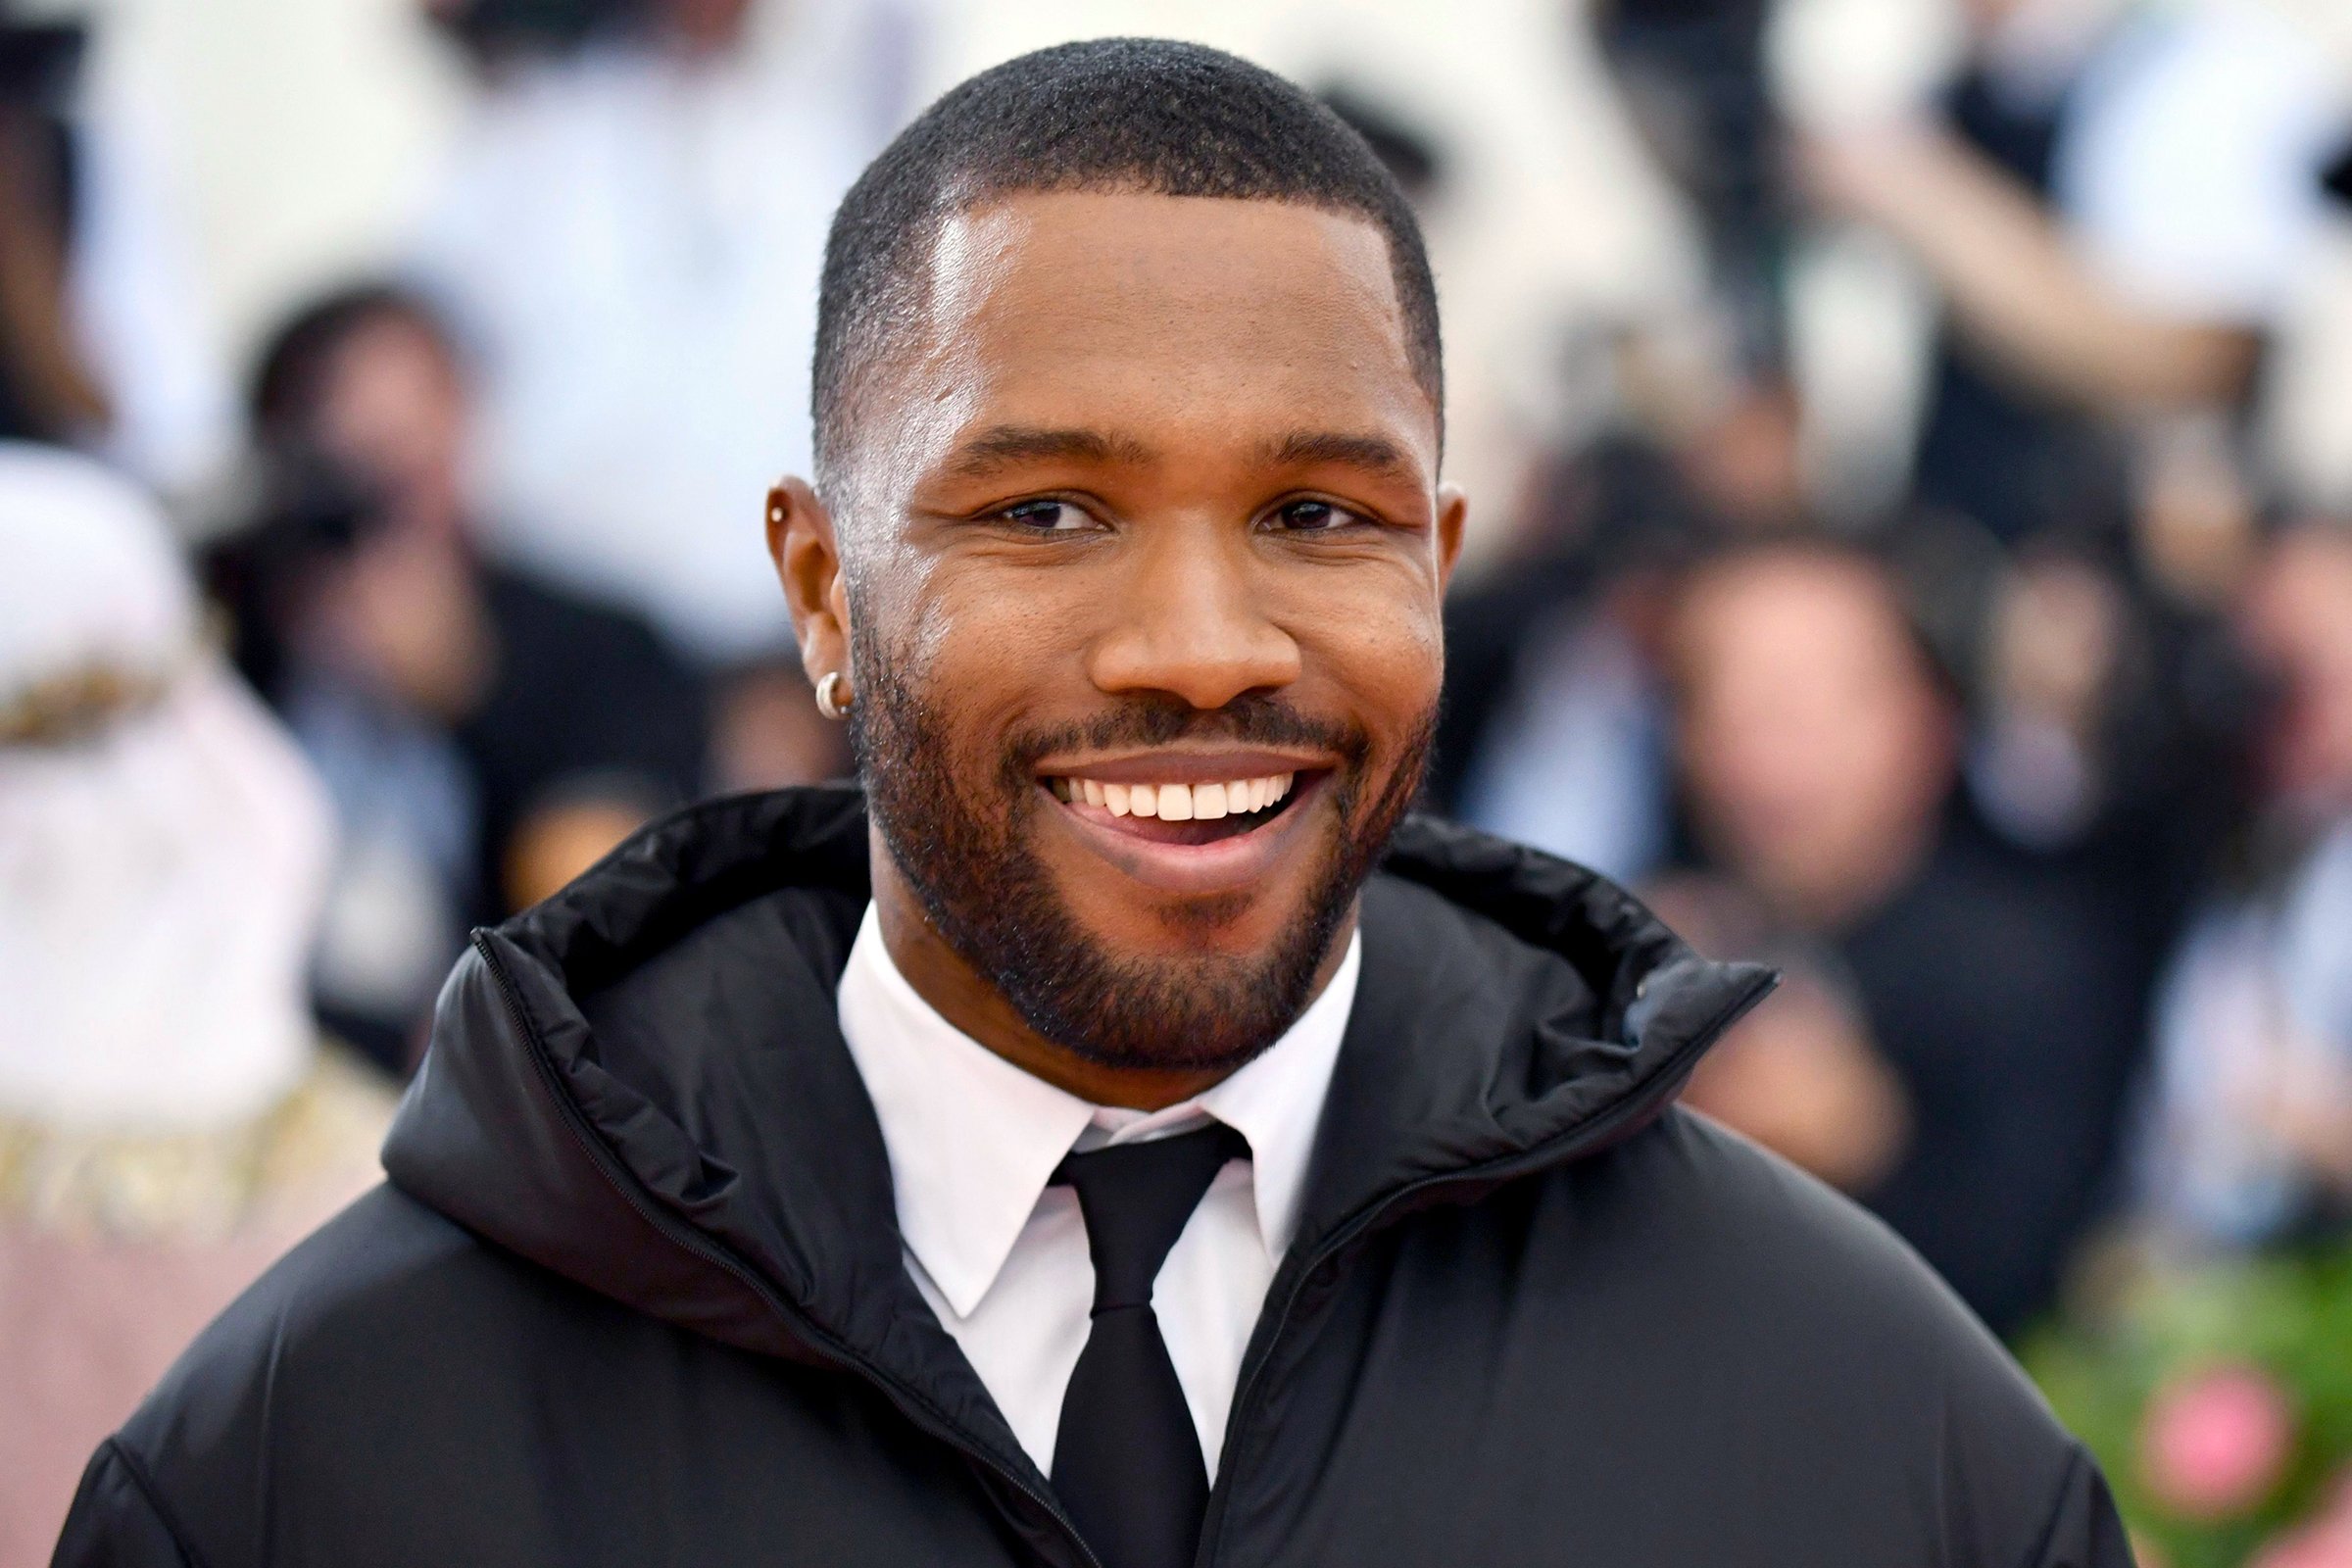 50 Facts About Frank Ocean - Facts.net